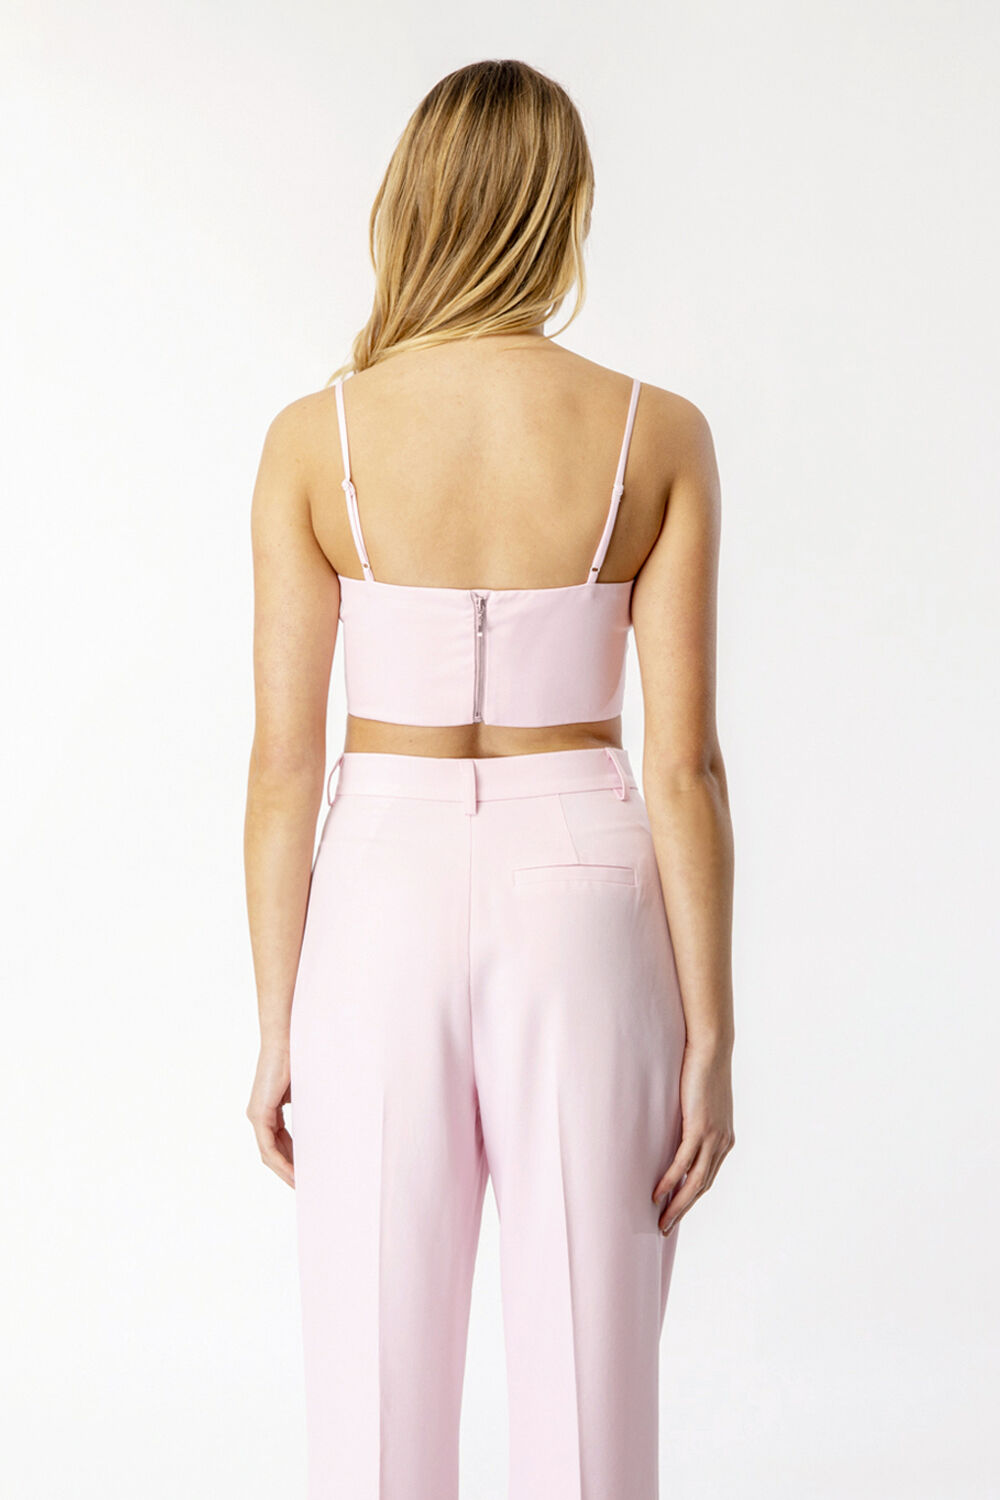 ATHENA CROP TOP in colour SOFT PINK